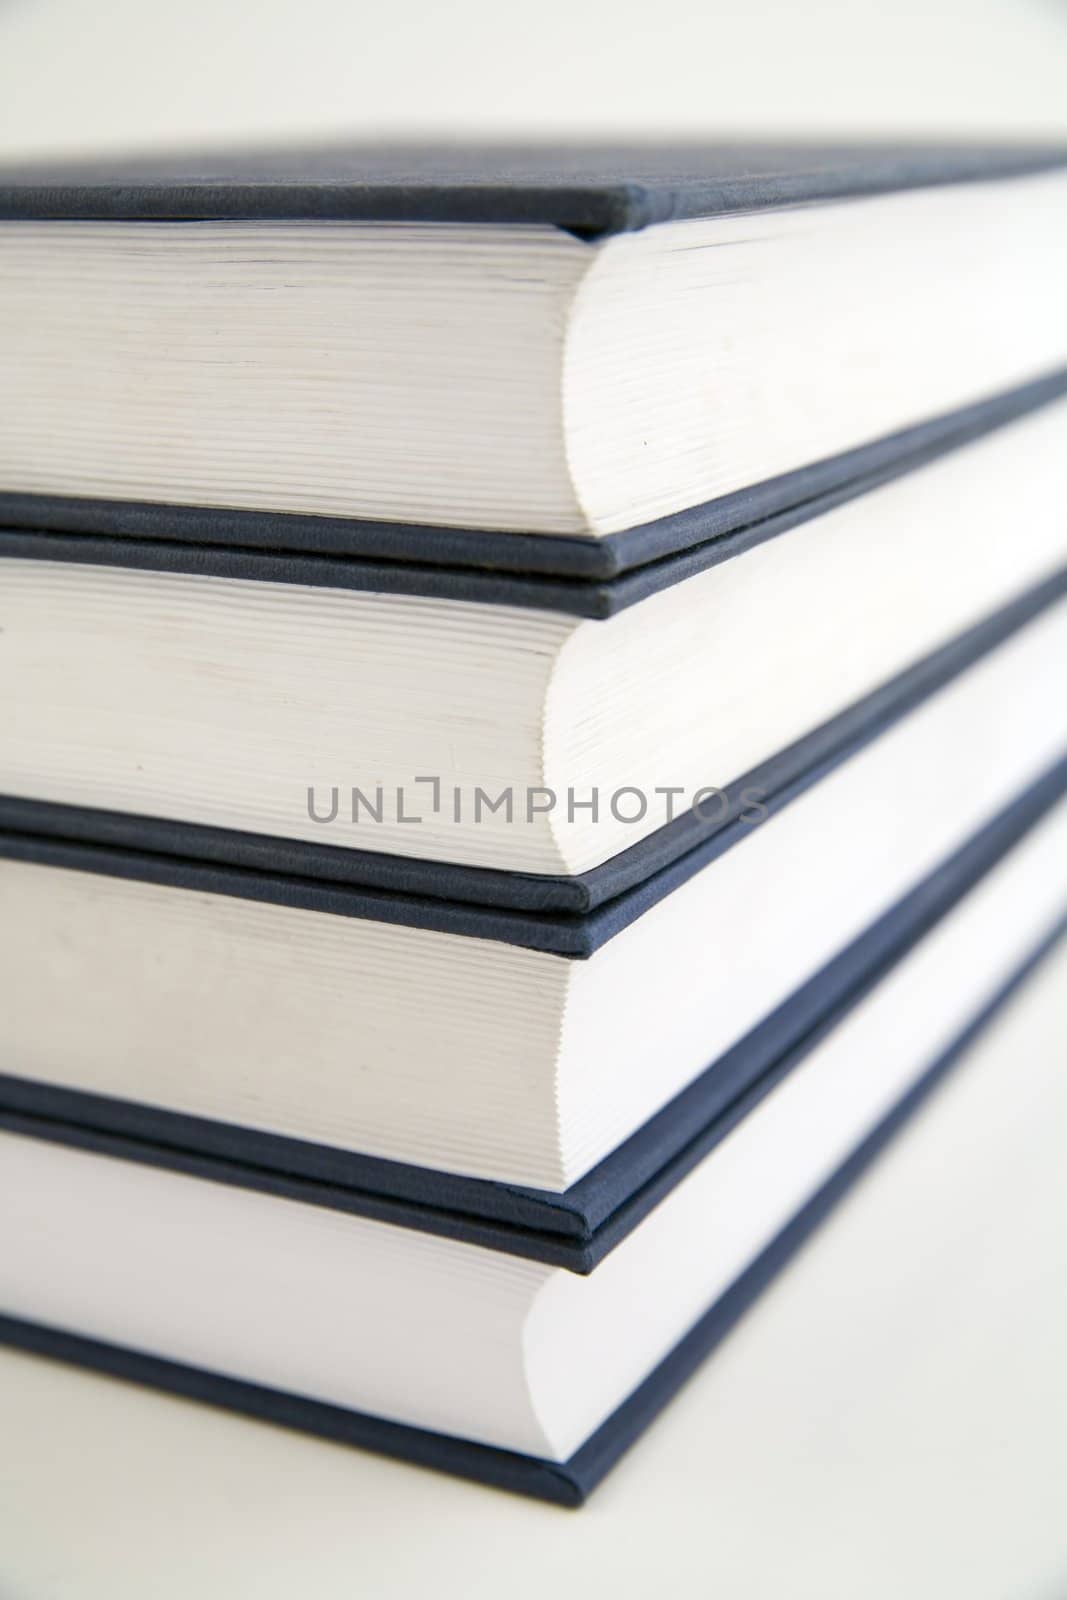 stack of books by furzyk73